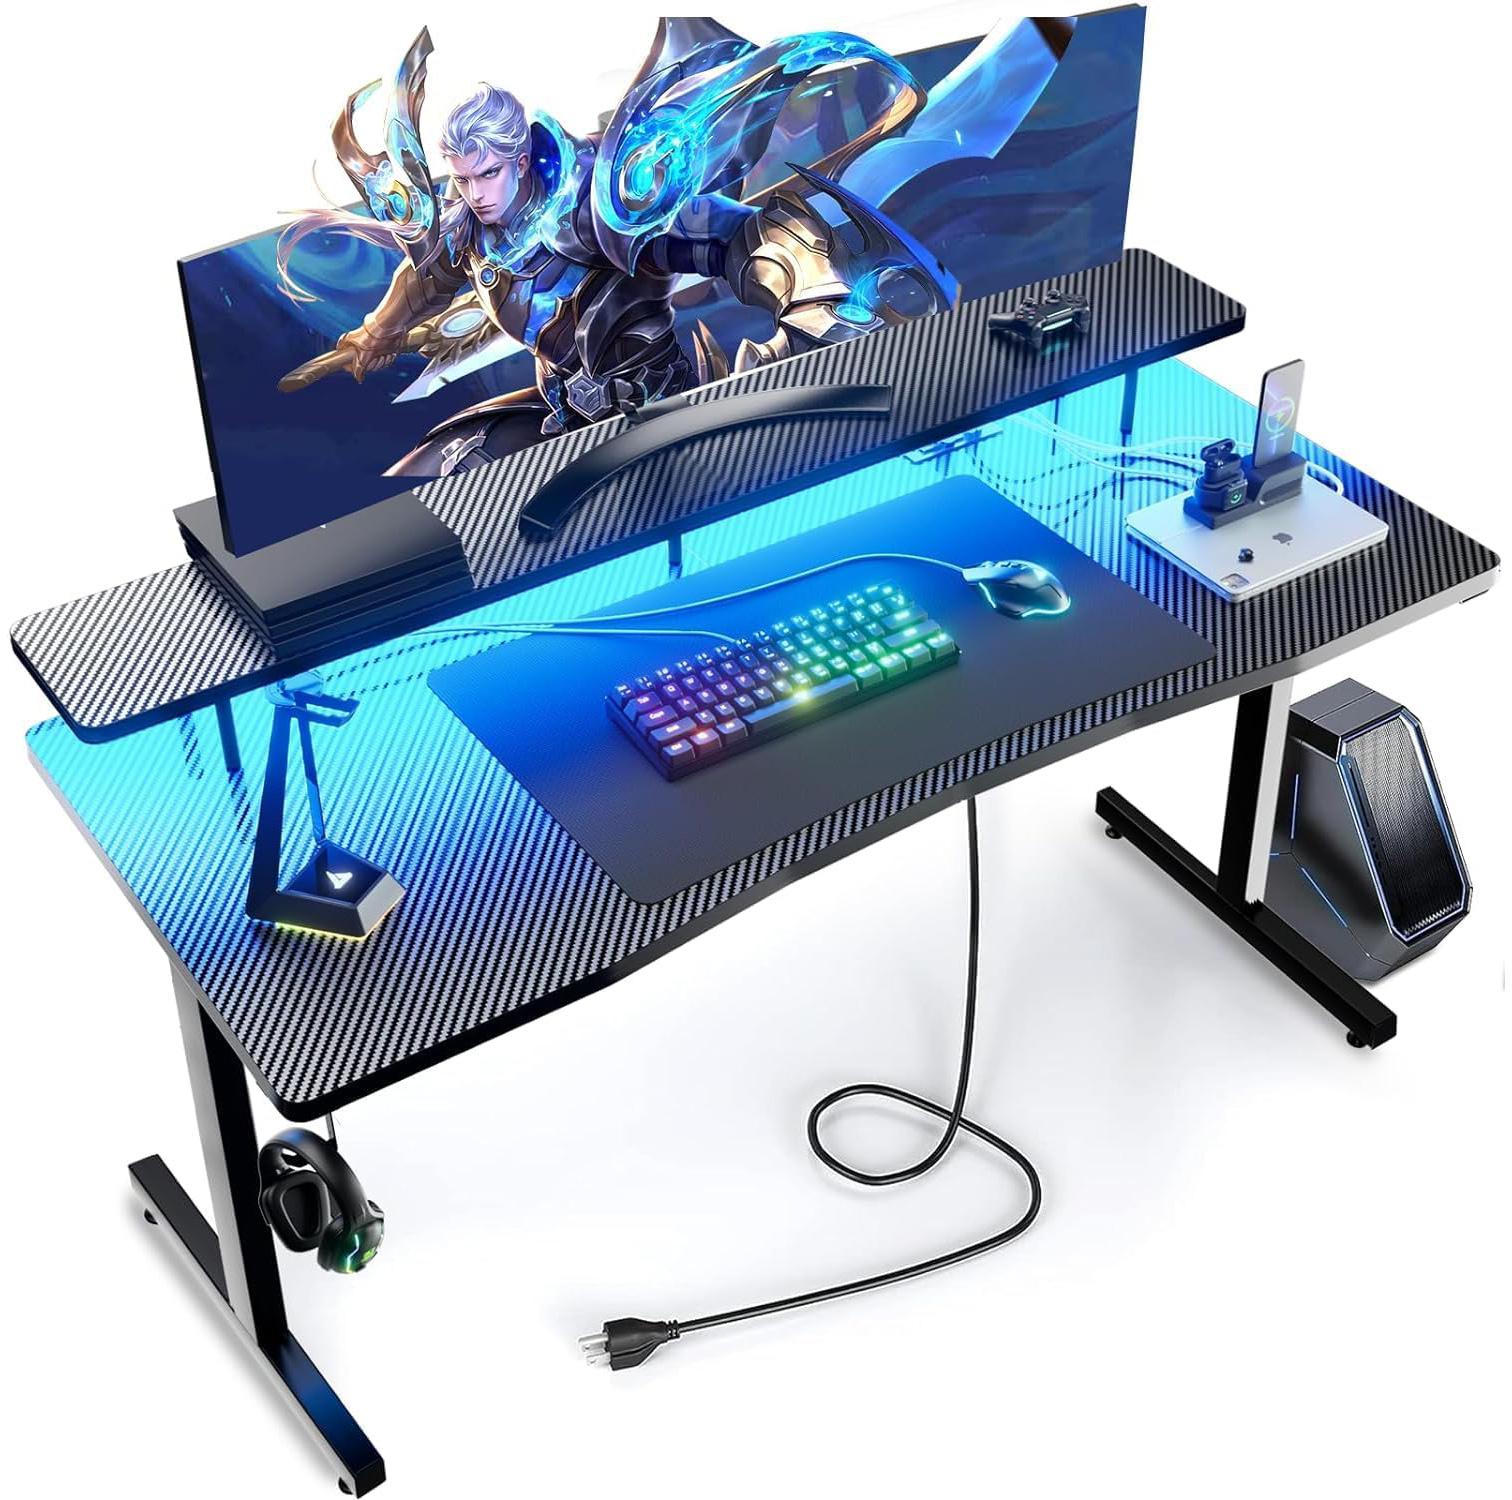 Gtracing 55in Gaming Computer Desk with LED Lights for $49.29 Shipped